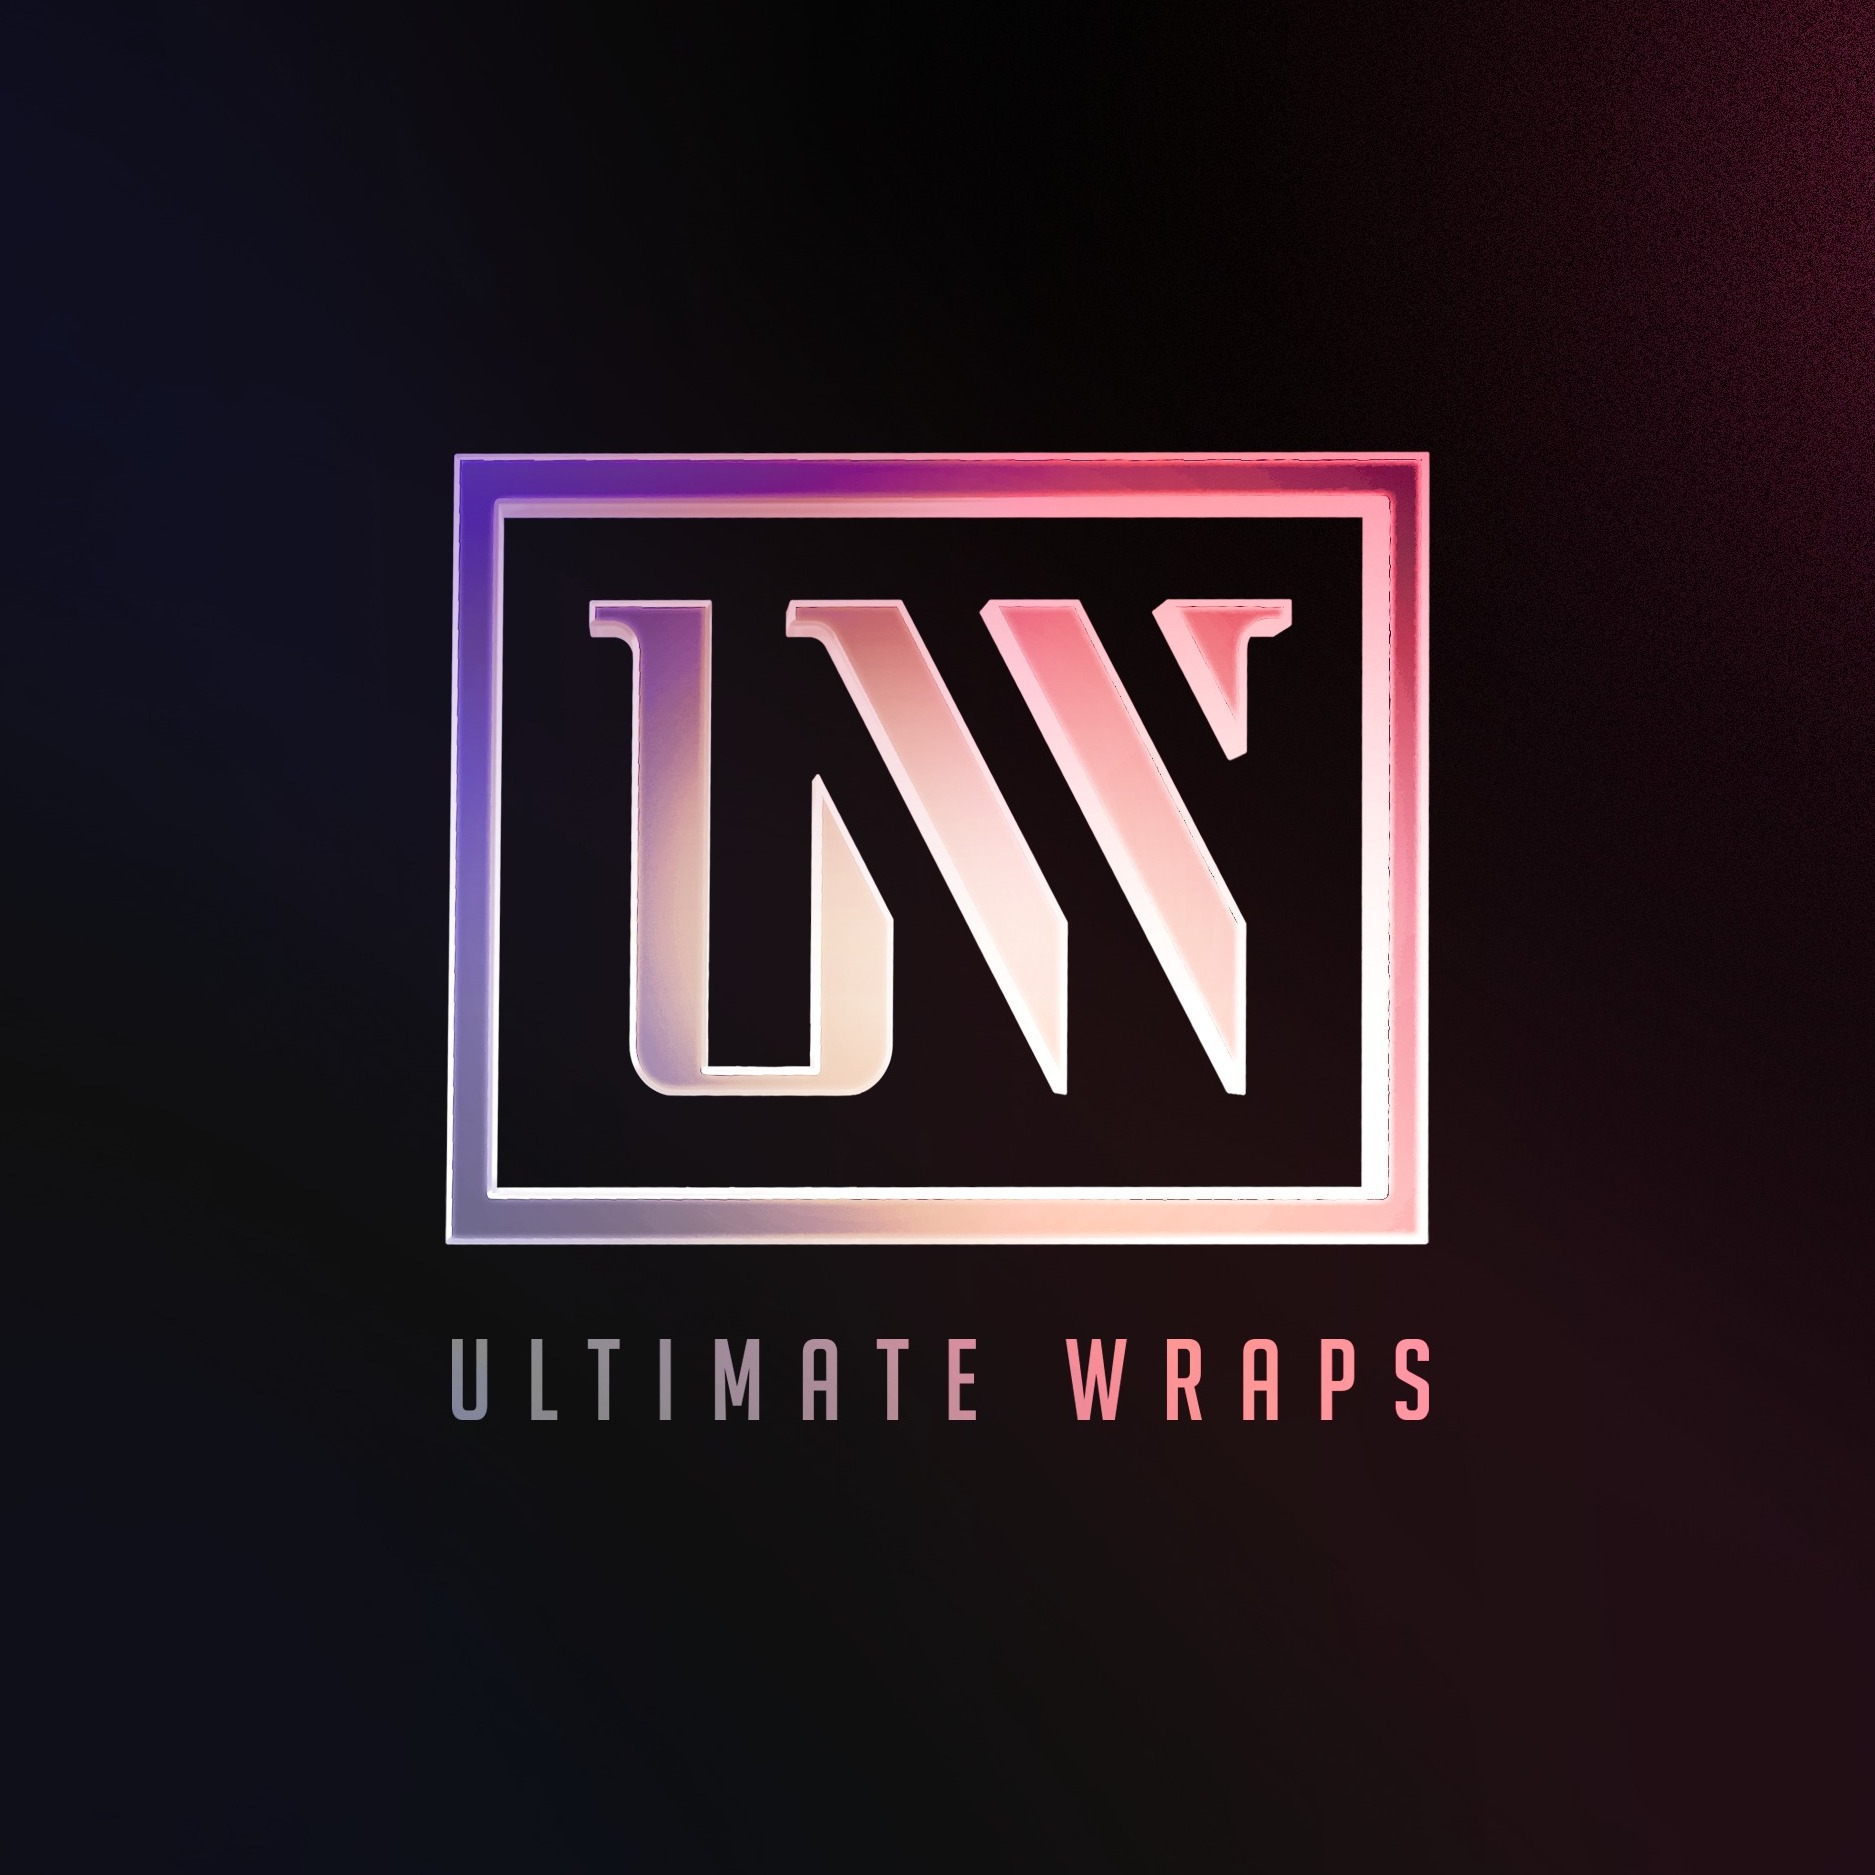 Ultimate Wraps